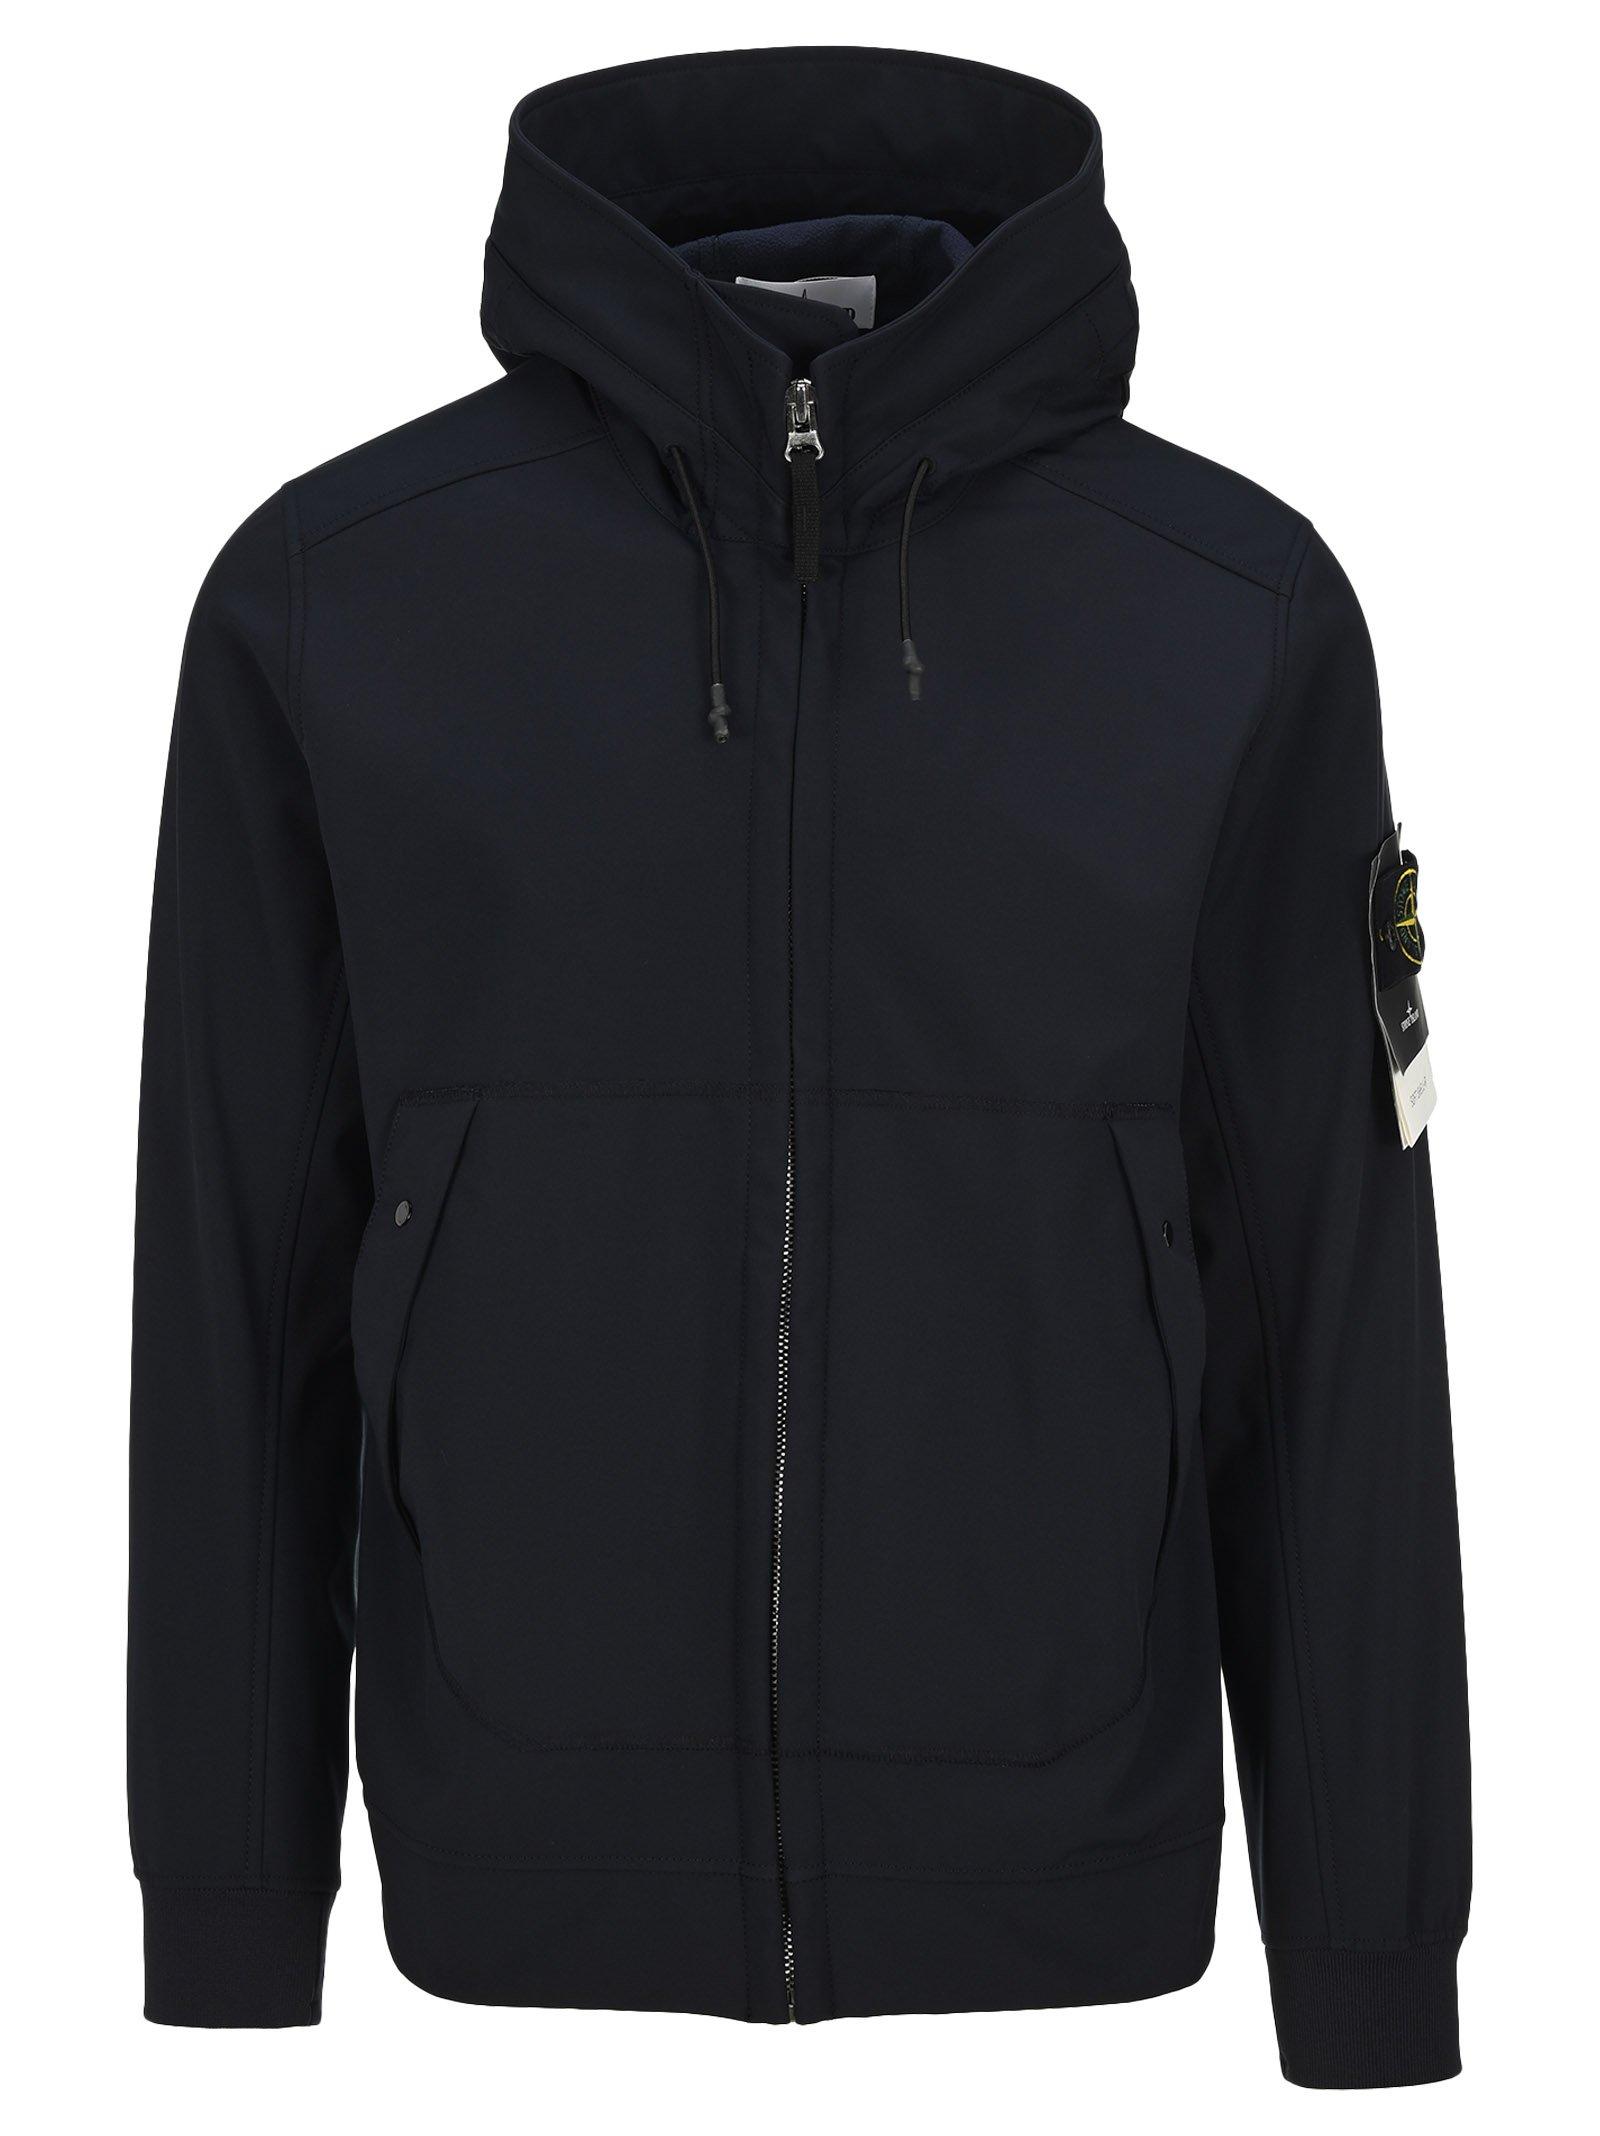 Stone Island Synthetic Soft Shell Hooded Jacket in Blue for Men - Lyst